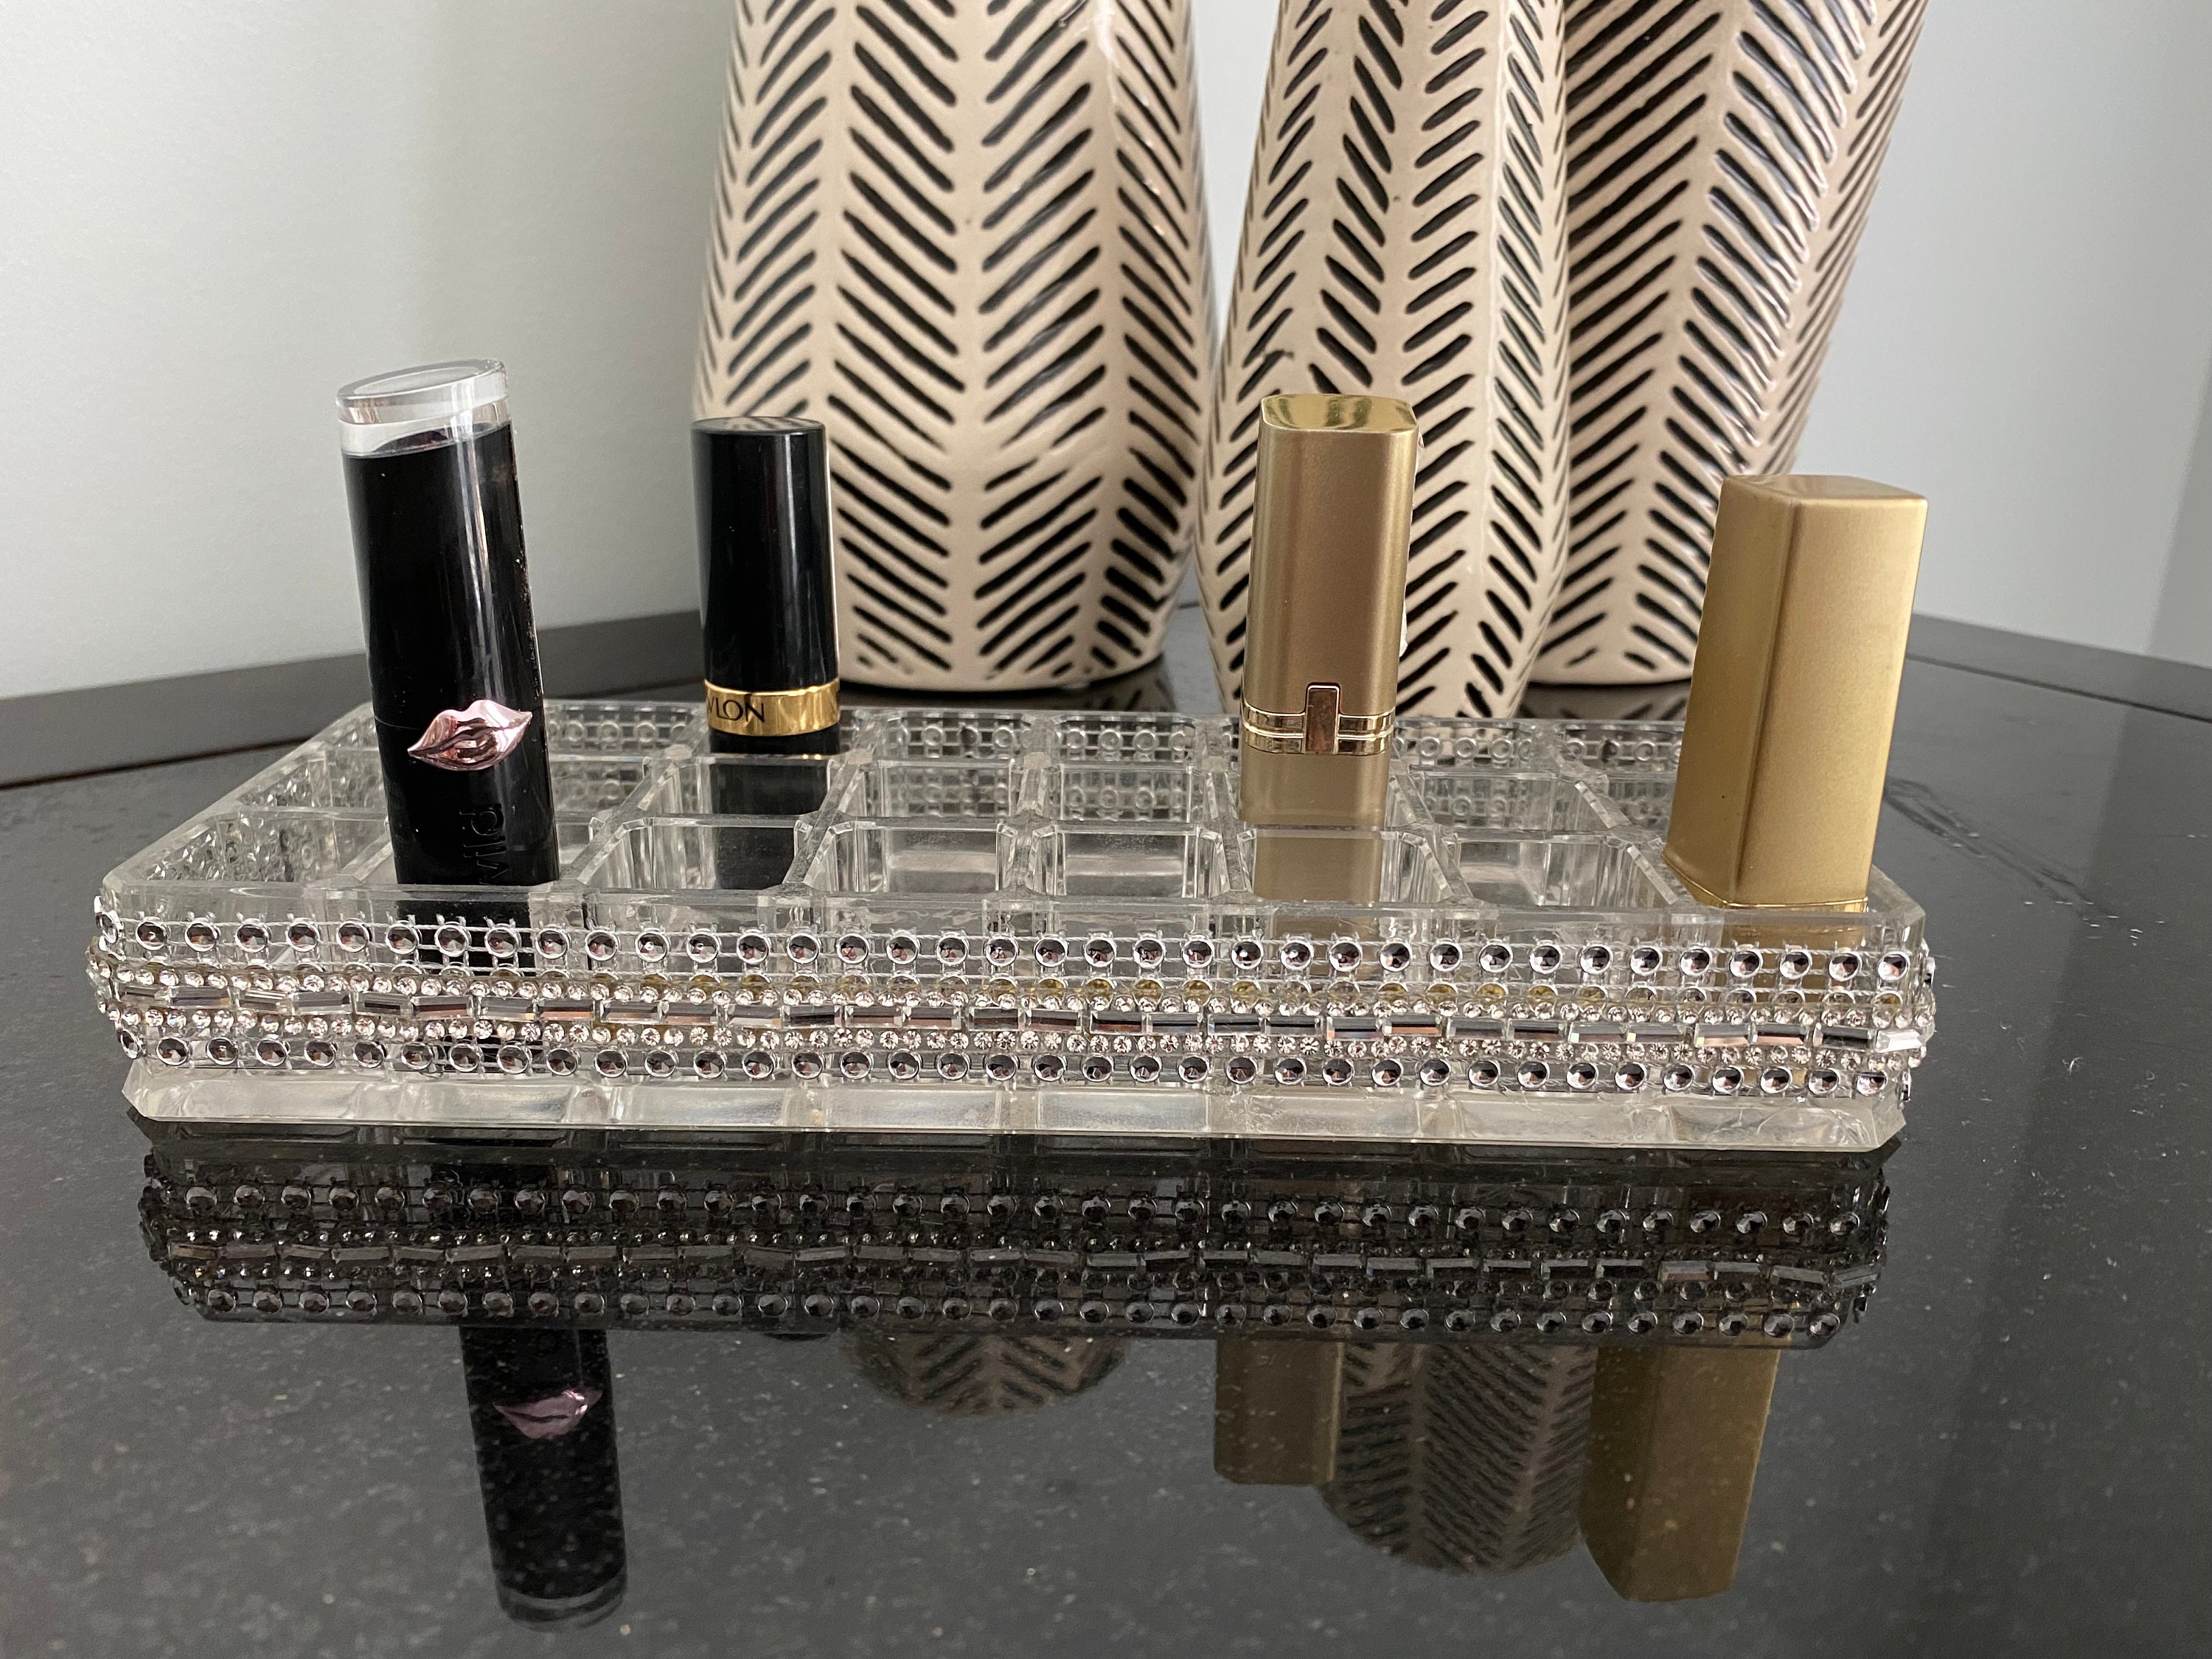 MyGift 10-Slot Vintage Brass Metal Makeup Holder with Acrylic Base,  Lipstick and Mascara Cosmetic Organizer Vanity Tray